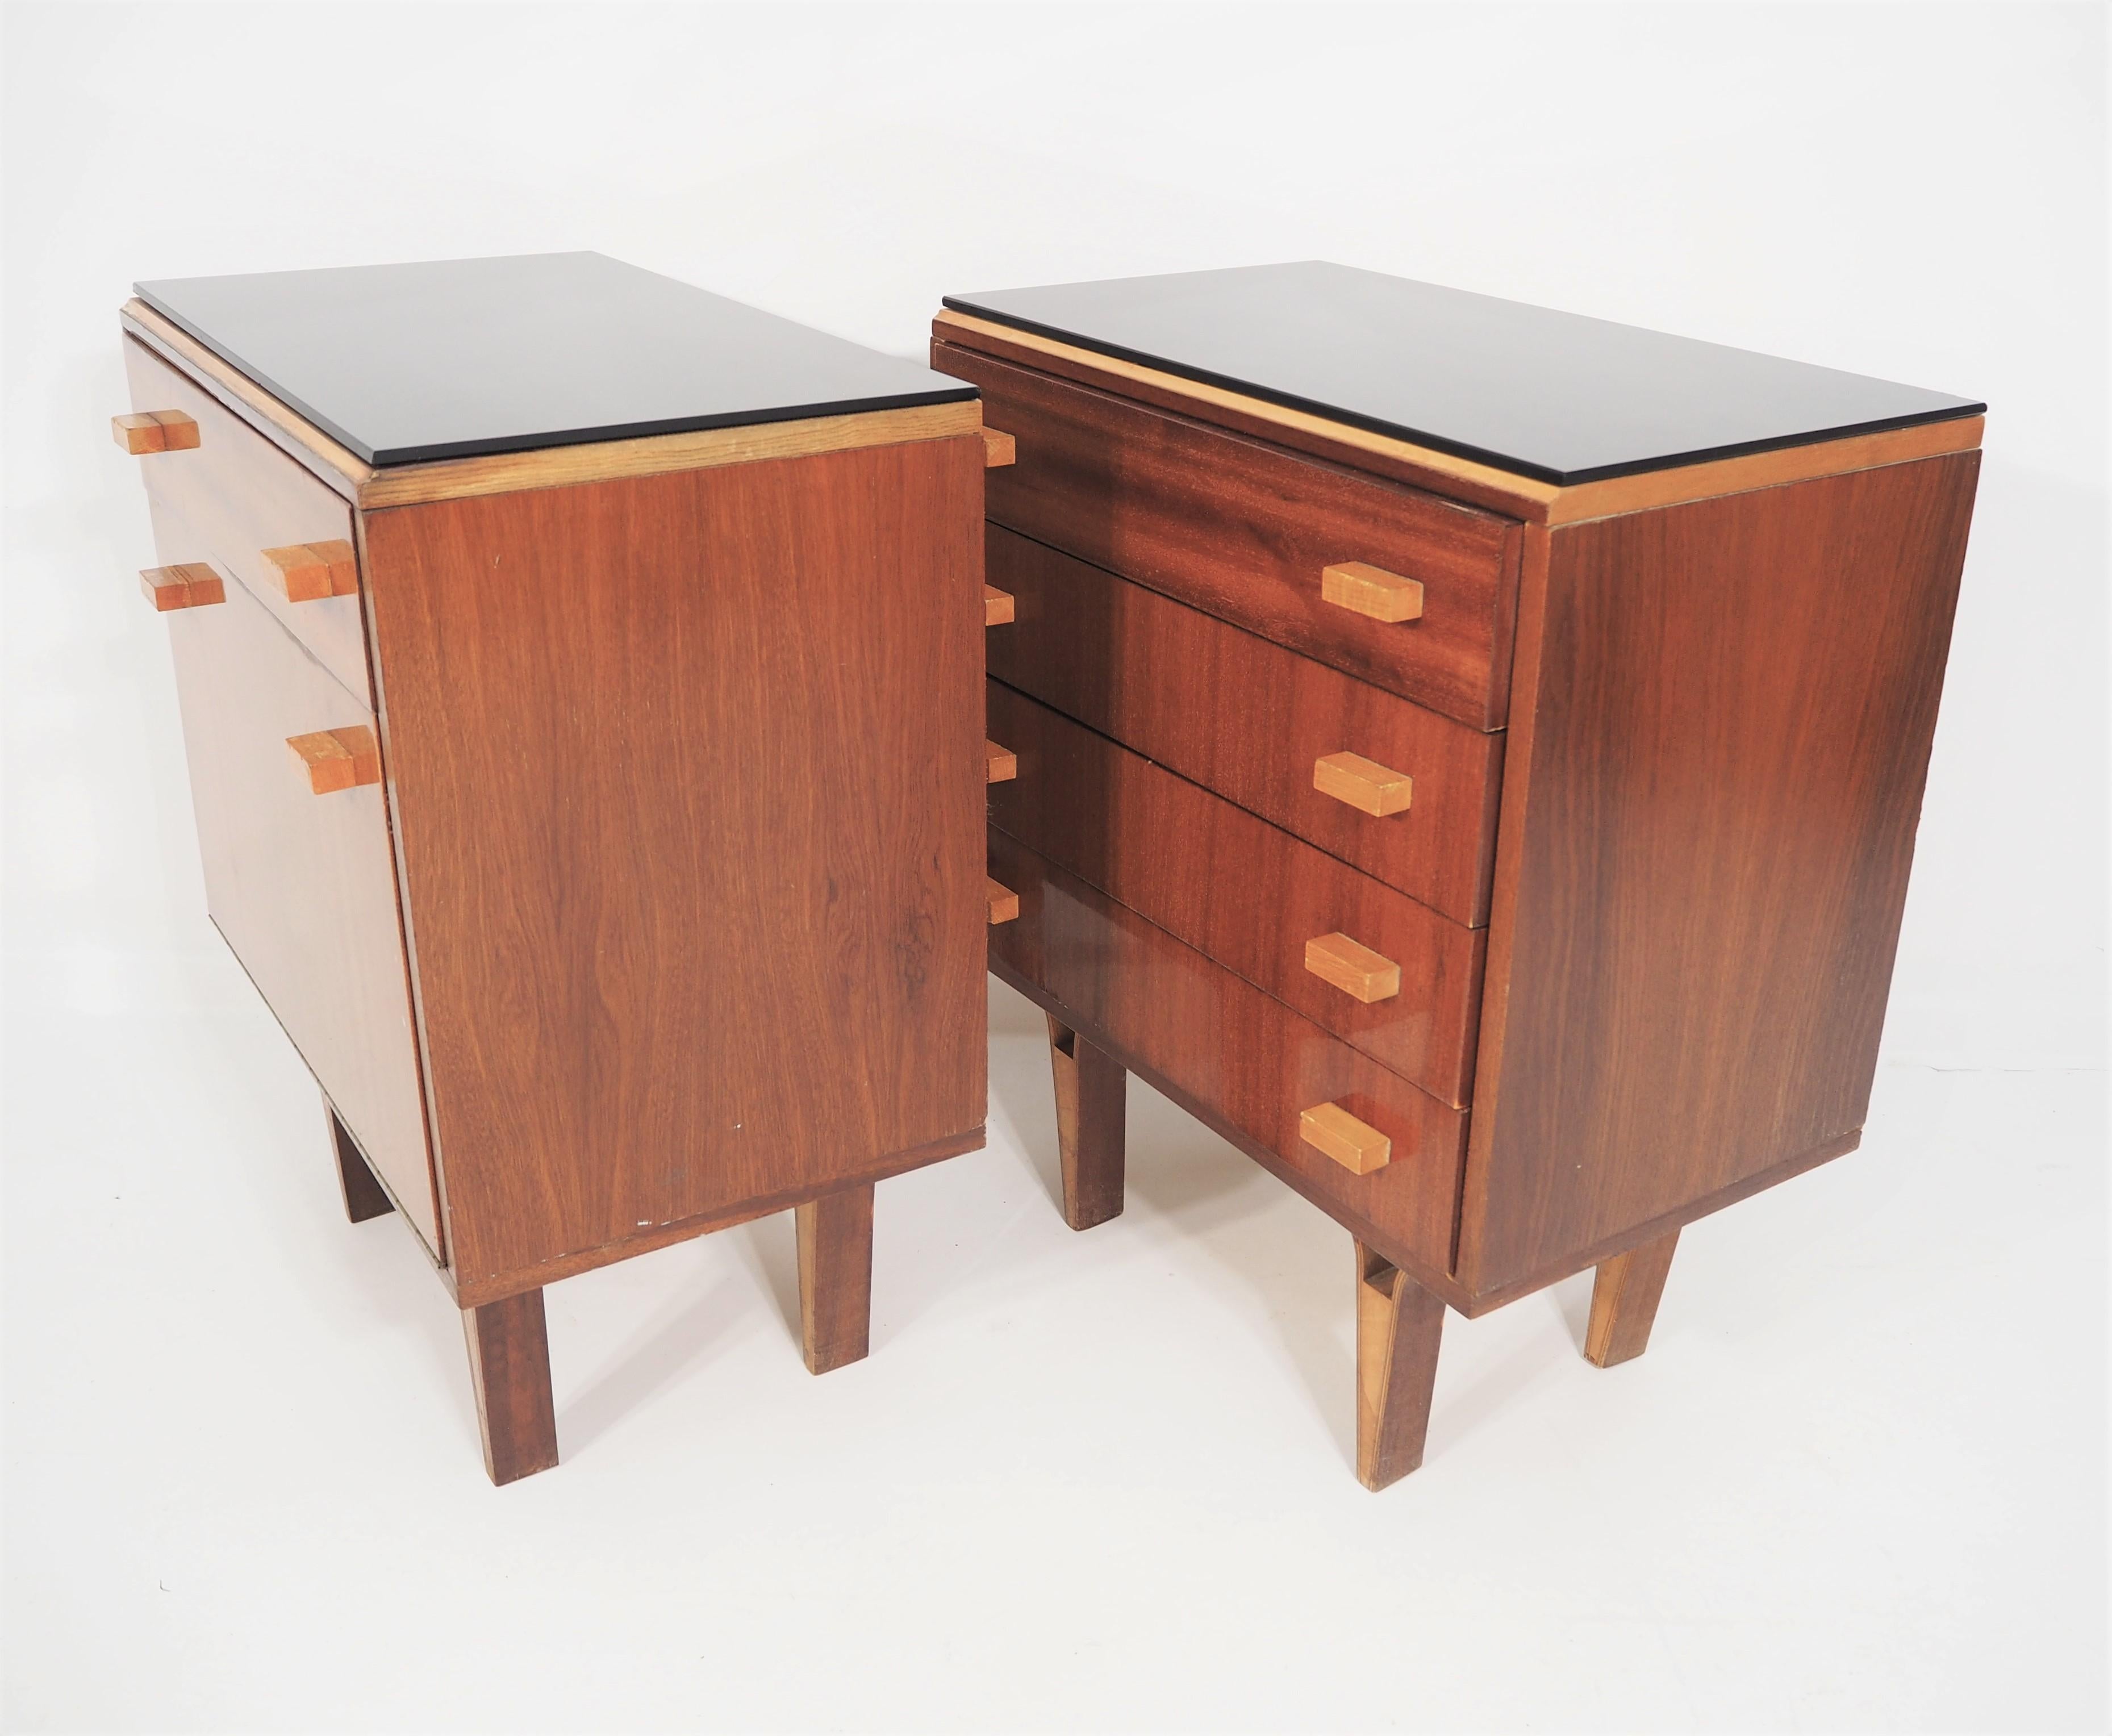 Vintage nightstands 1970s, set of 2. Original condition. Scandinavian and Minimalist style is also perfect for modern interiors.